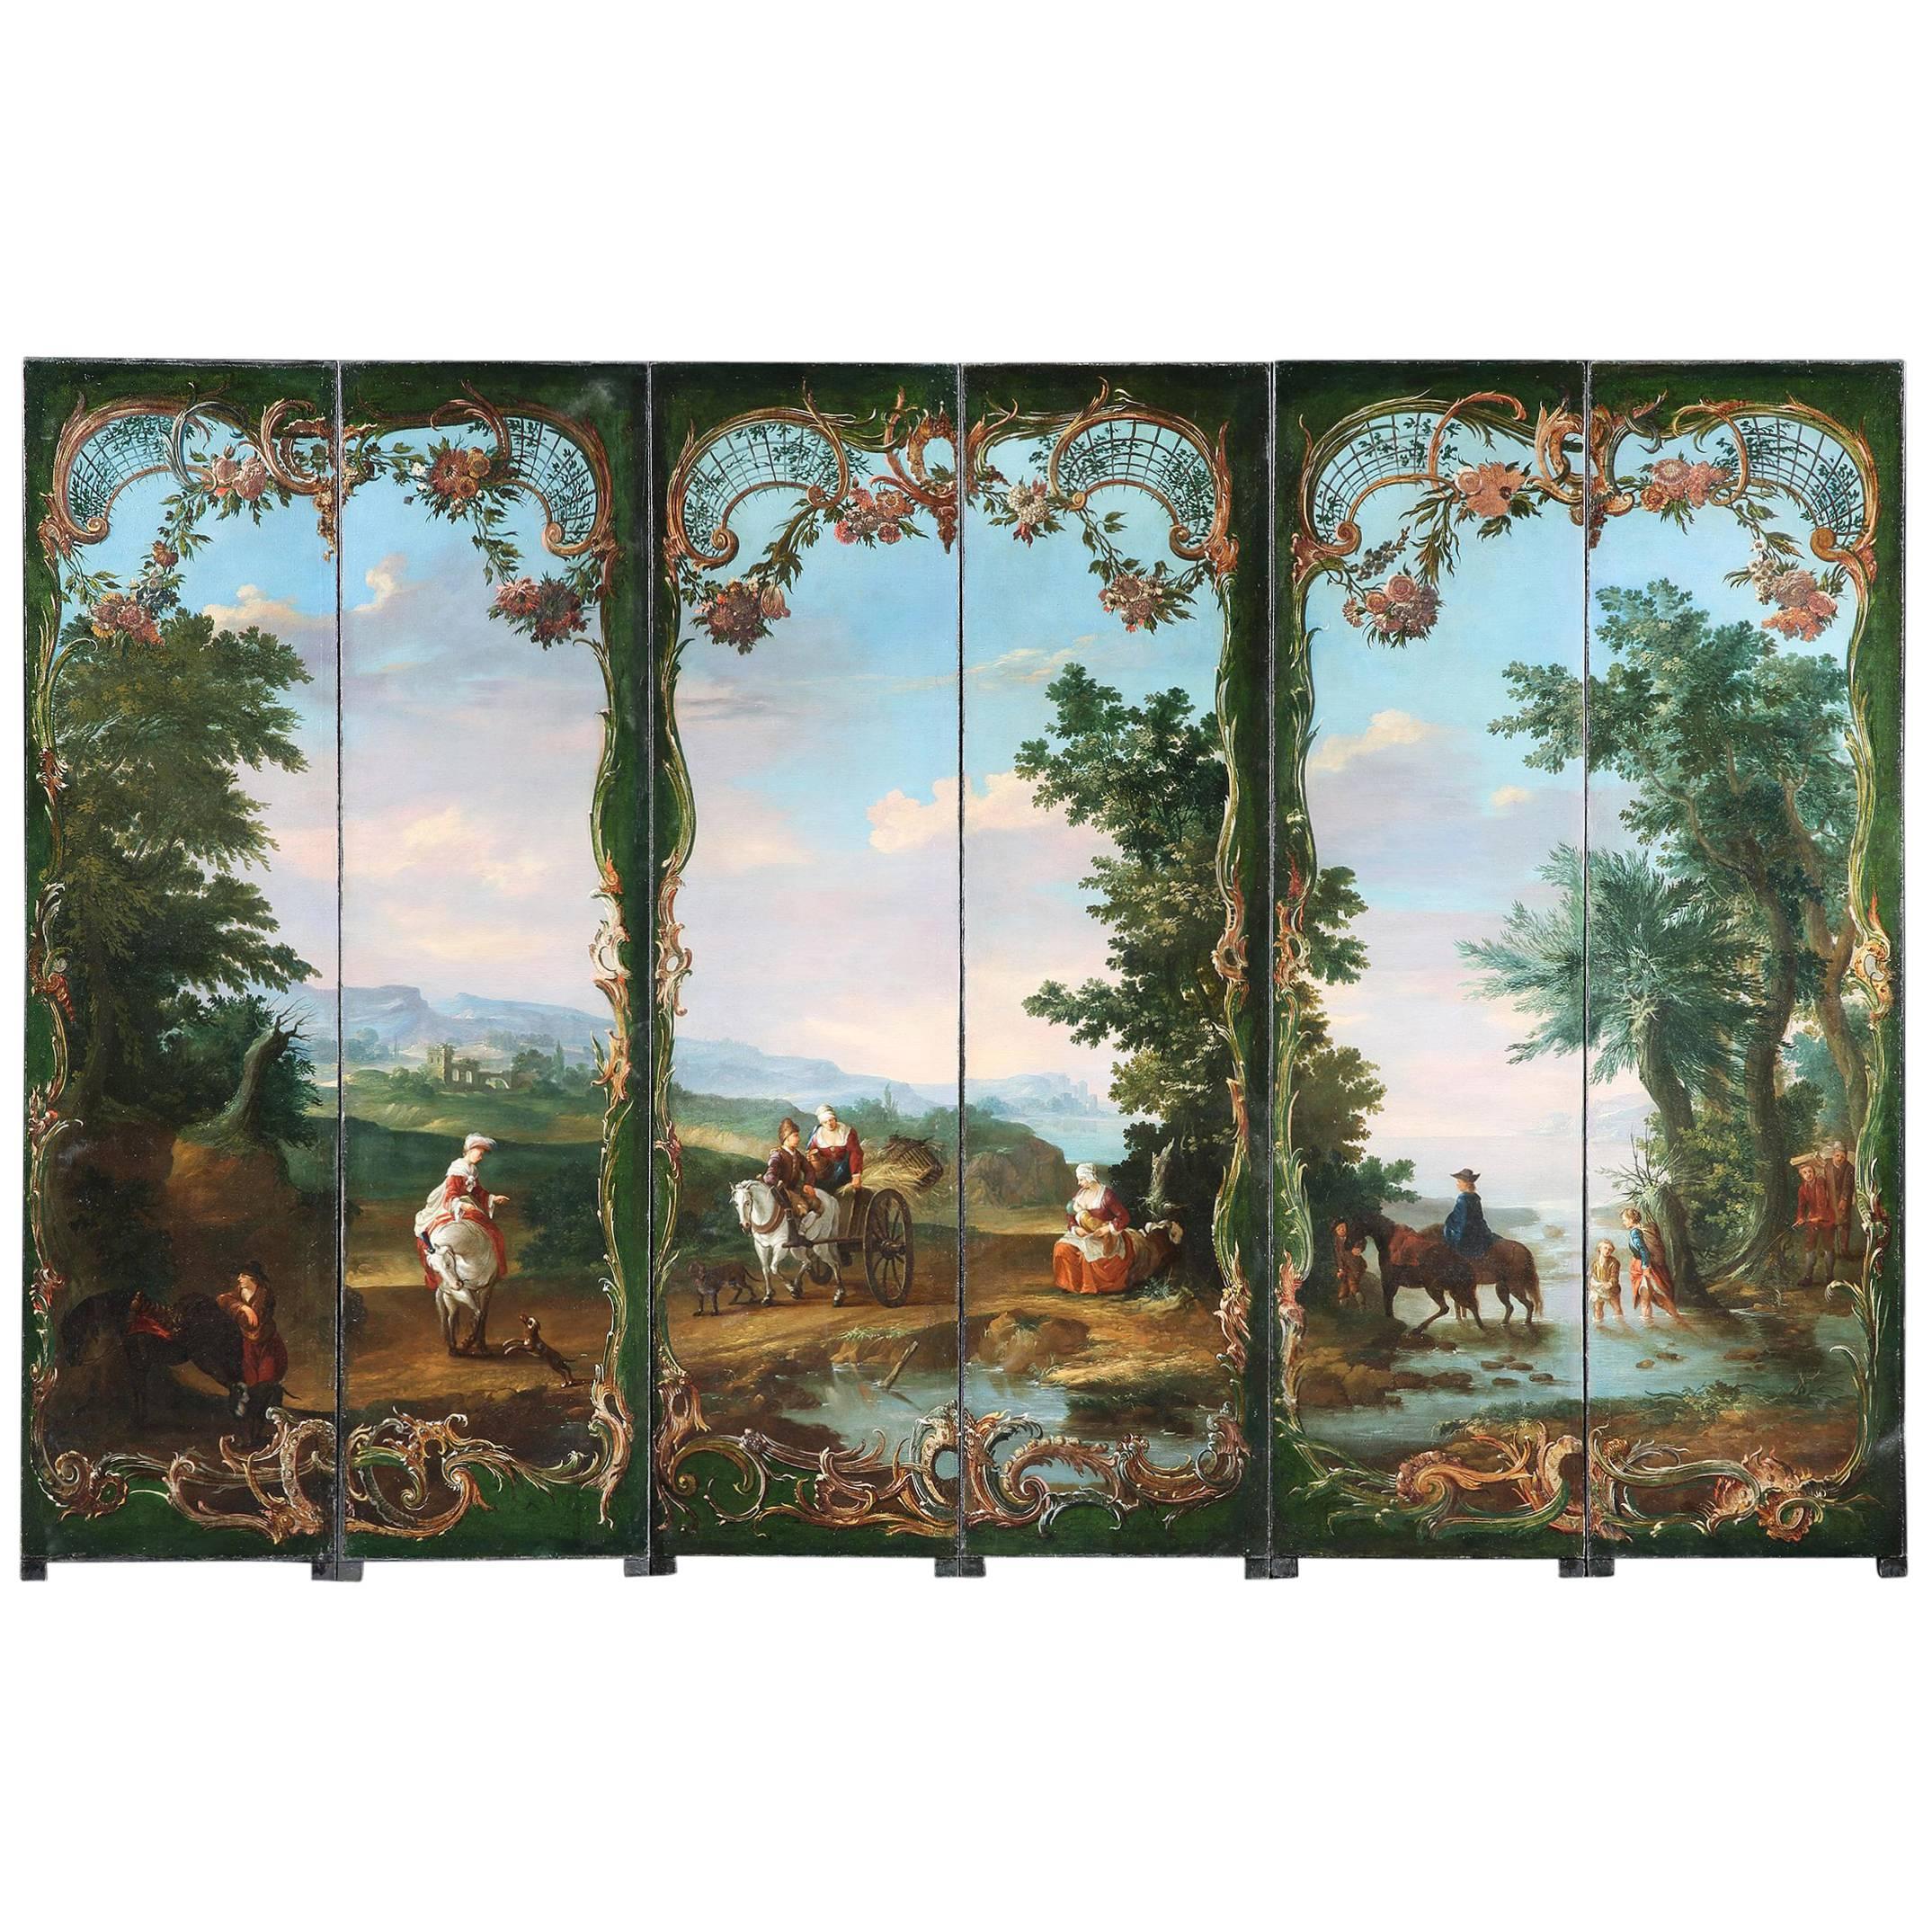 18th Century Painted Six Panelled Screen Depicting an European Landscape